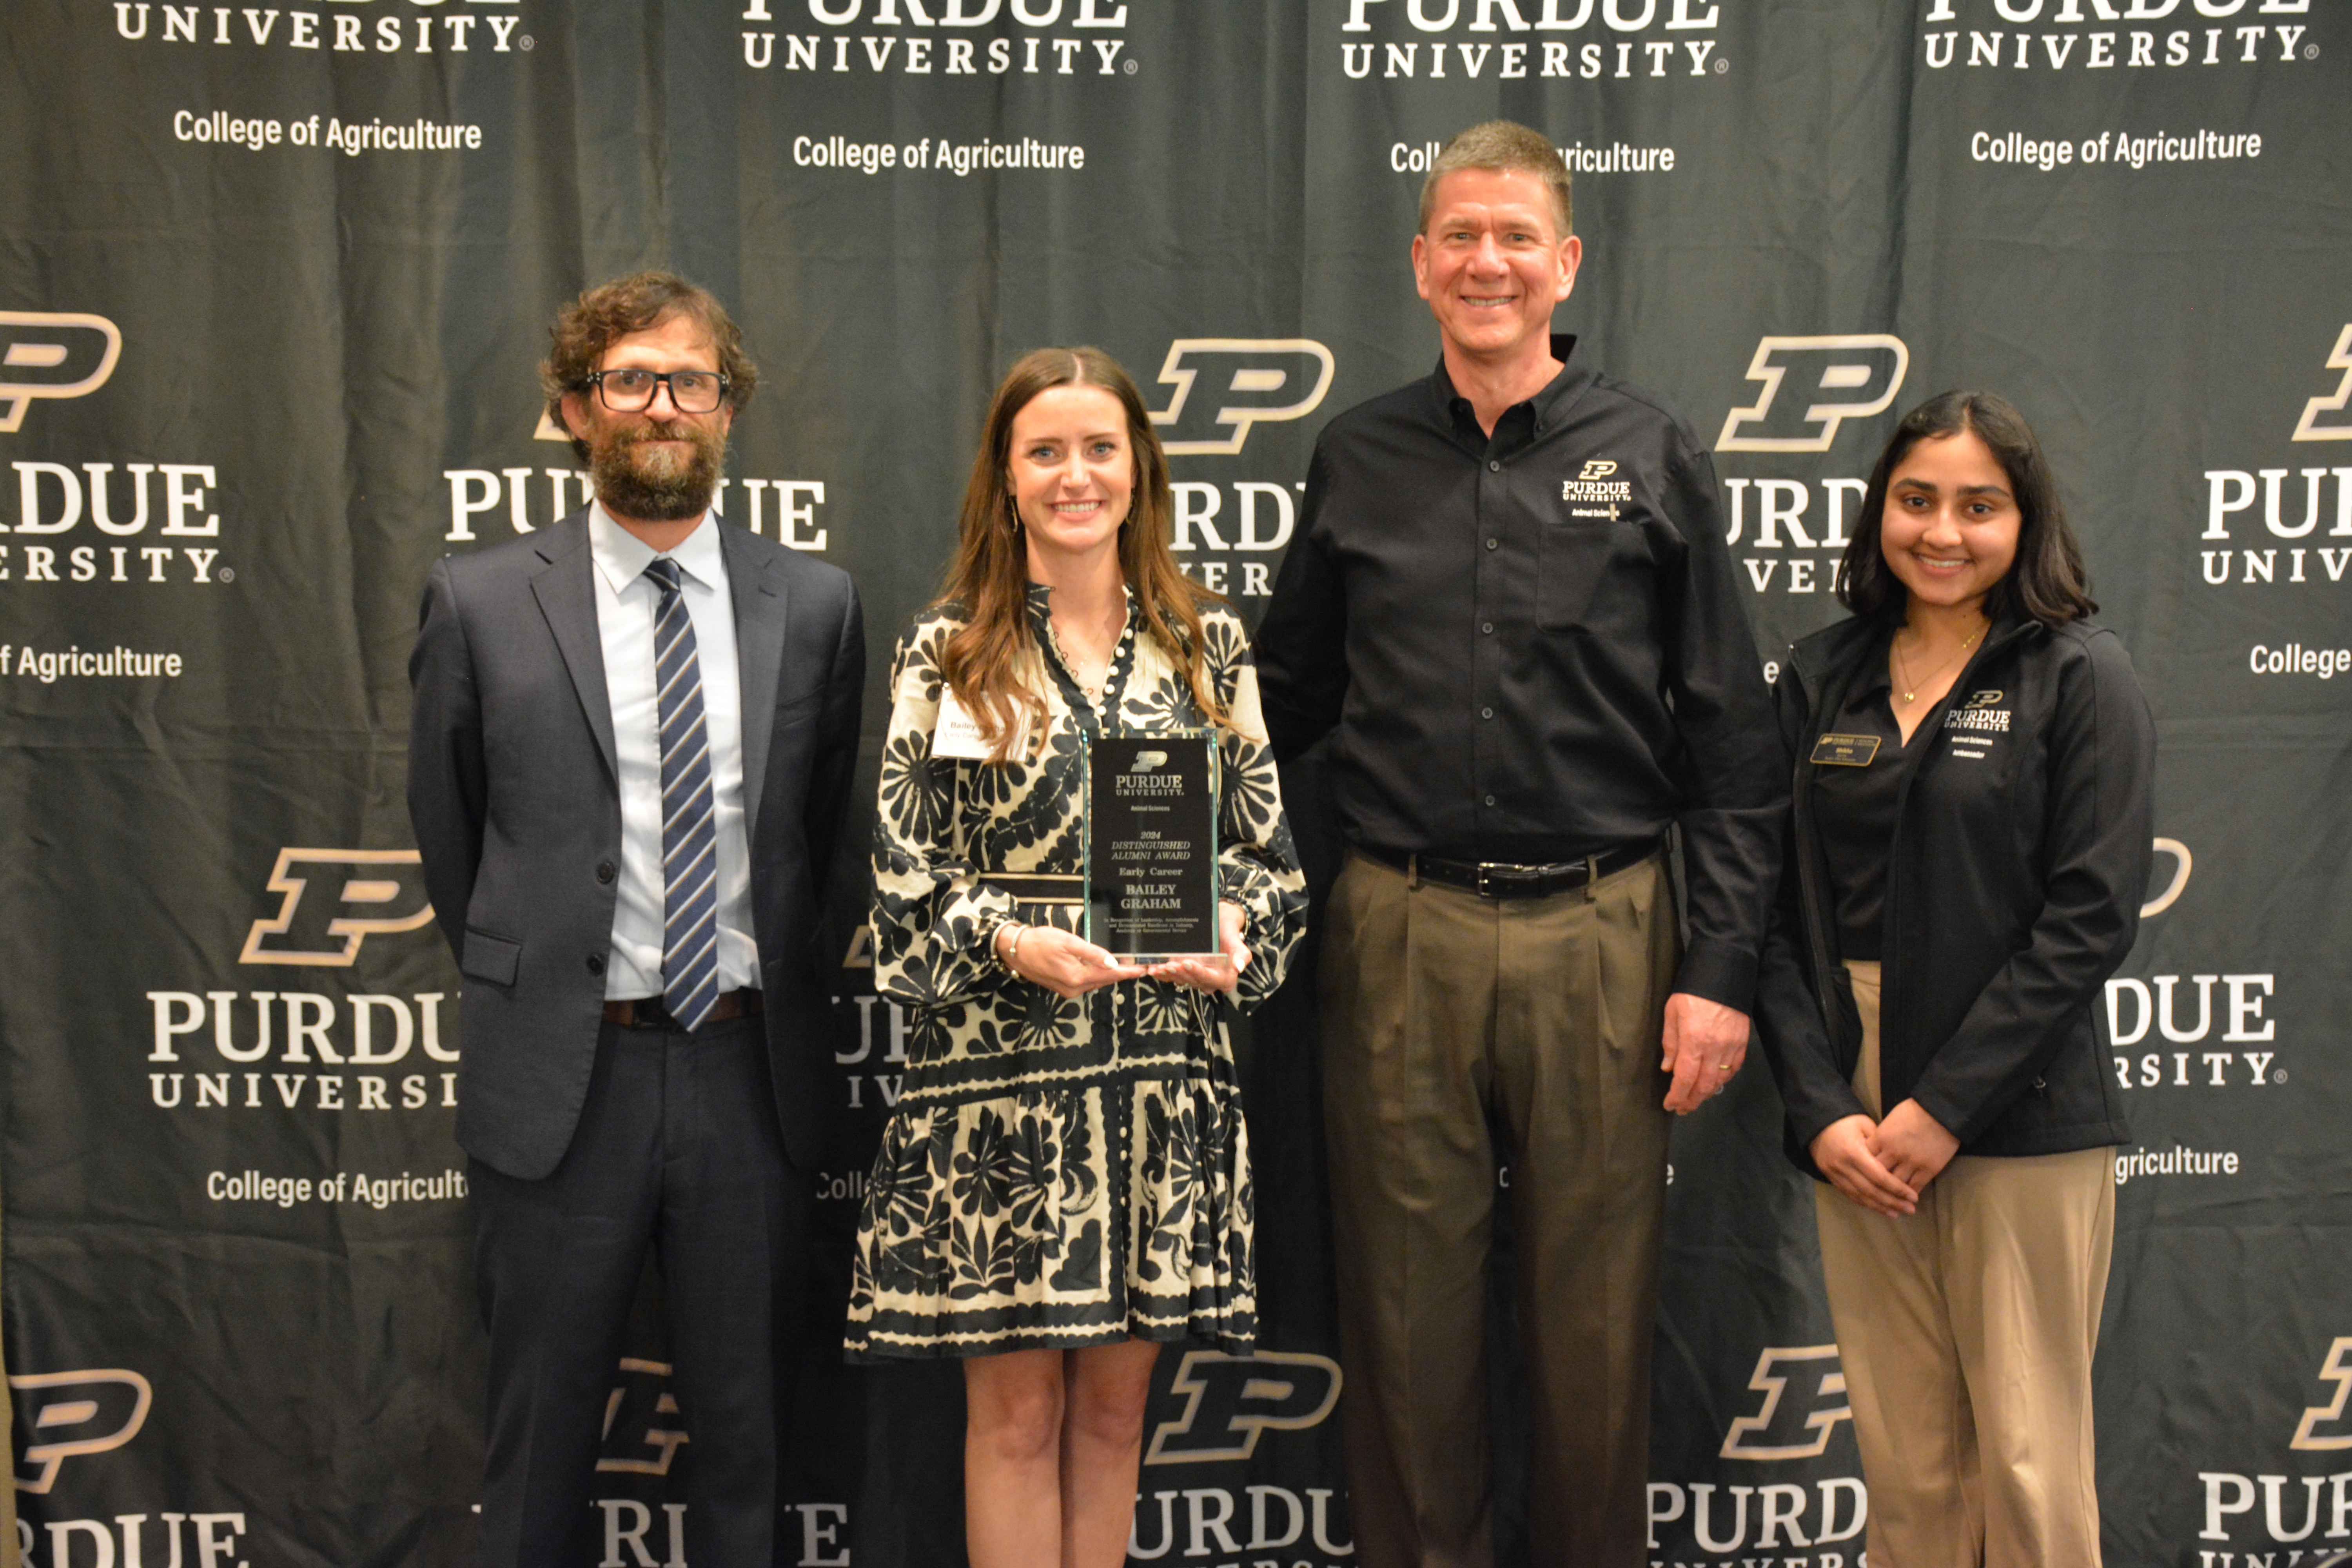 Bailey Graham holding award. Barry Delks, Dr. Paul Ebner, and Shikha Adhikari stand with her.